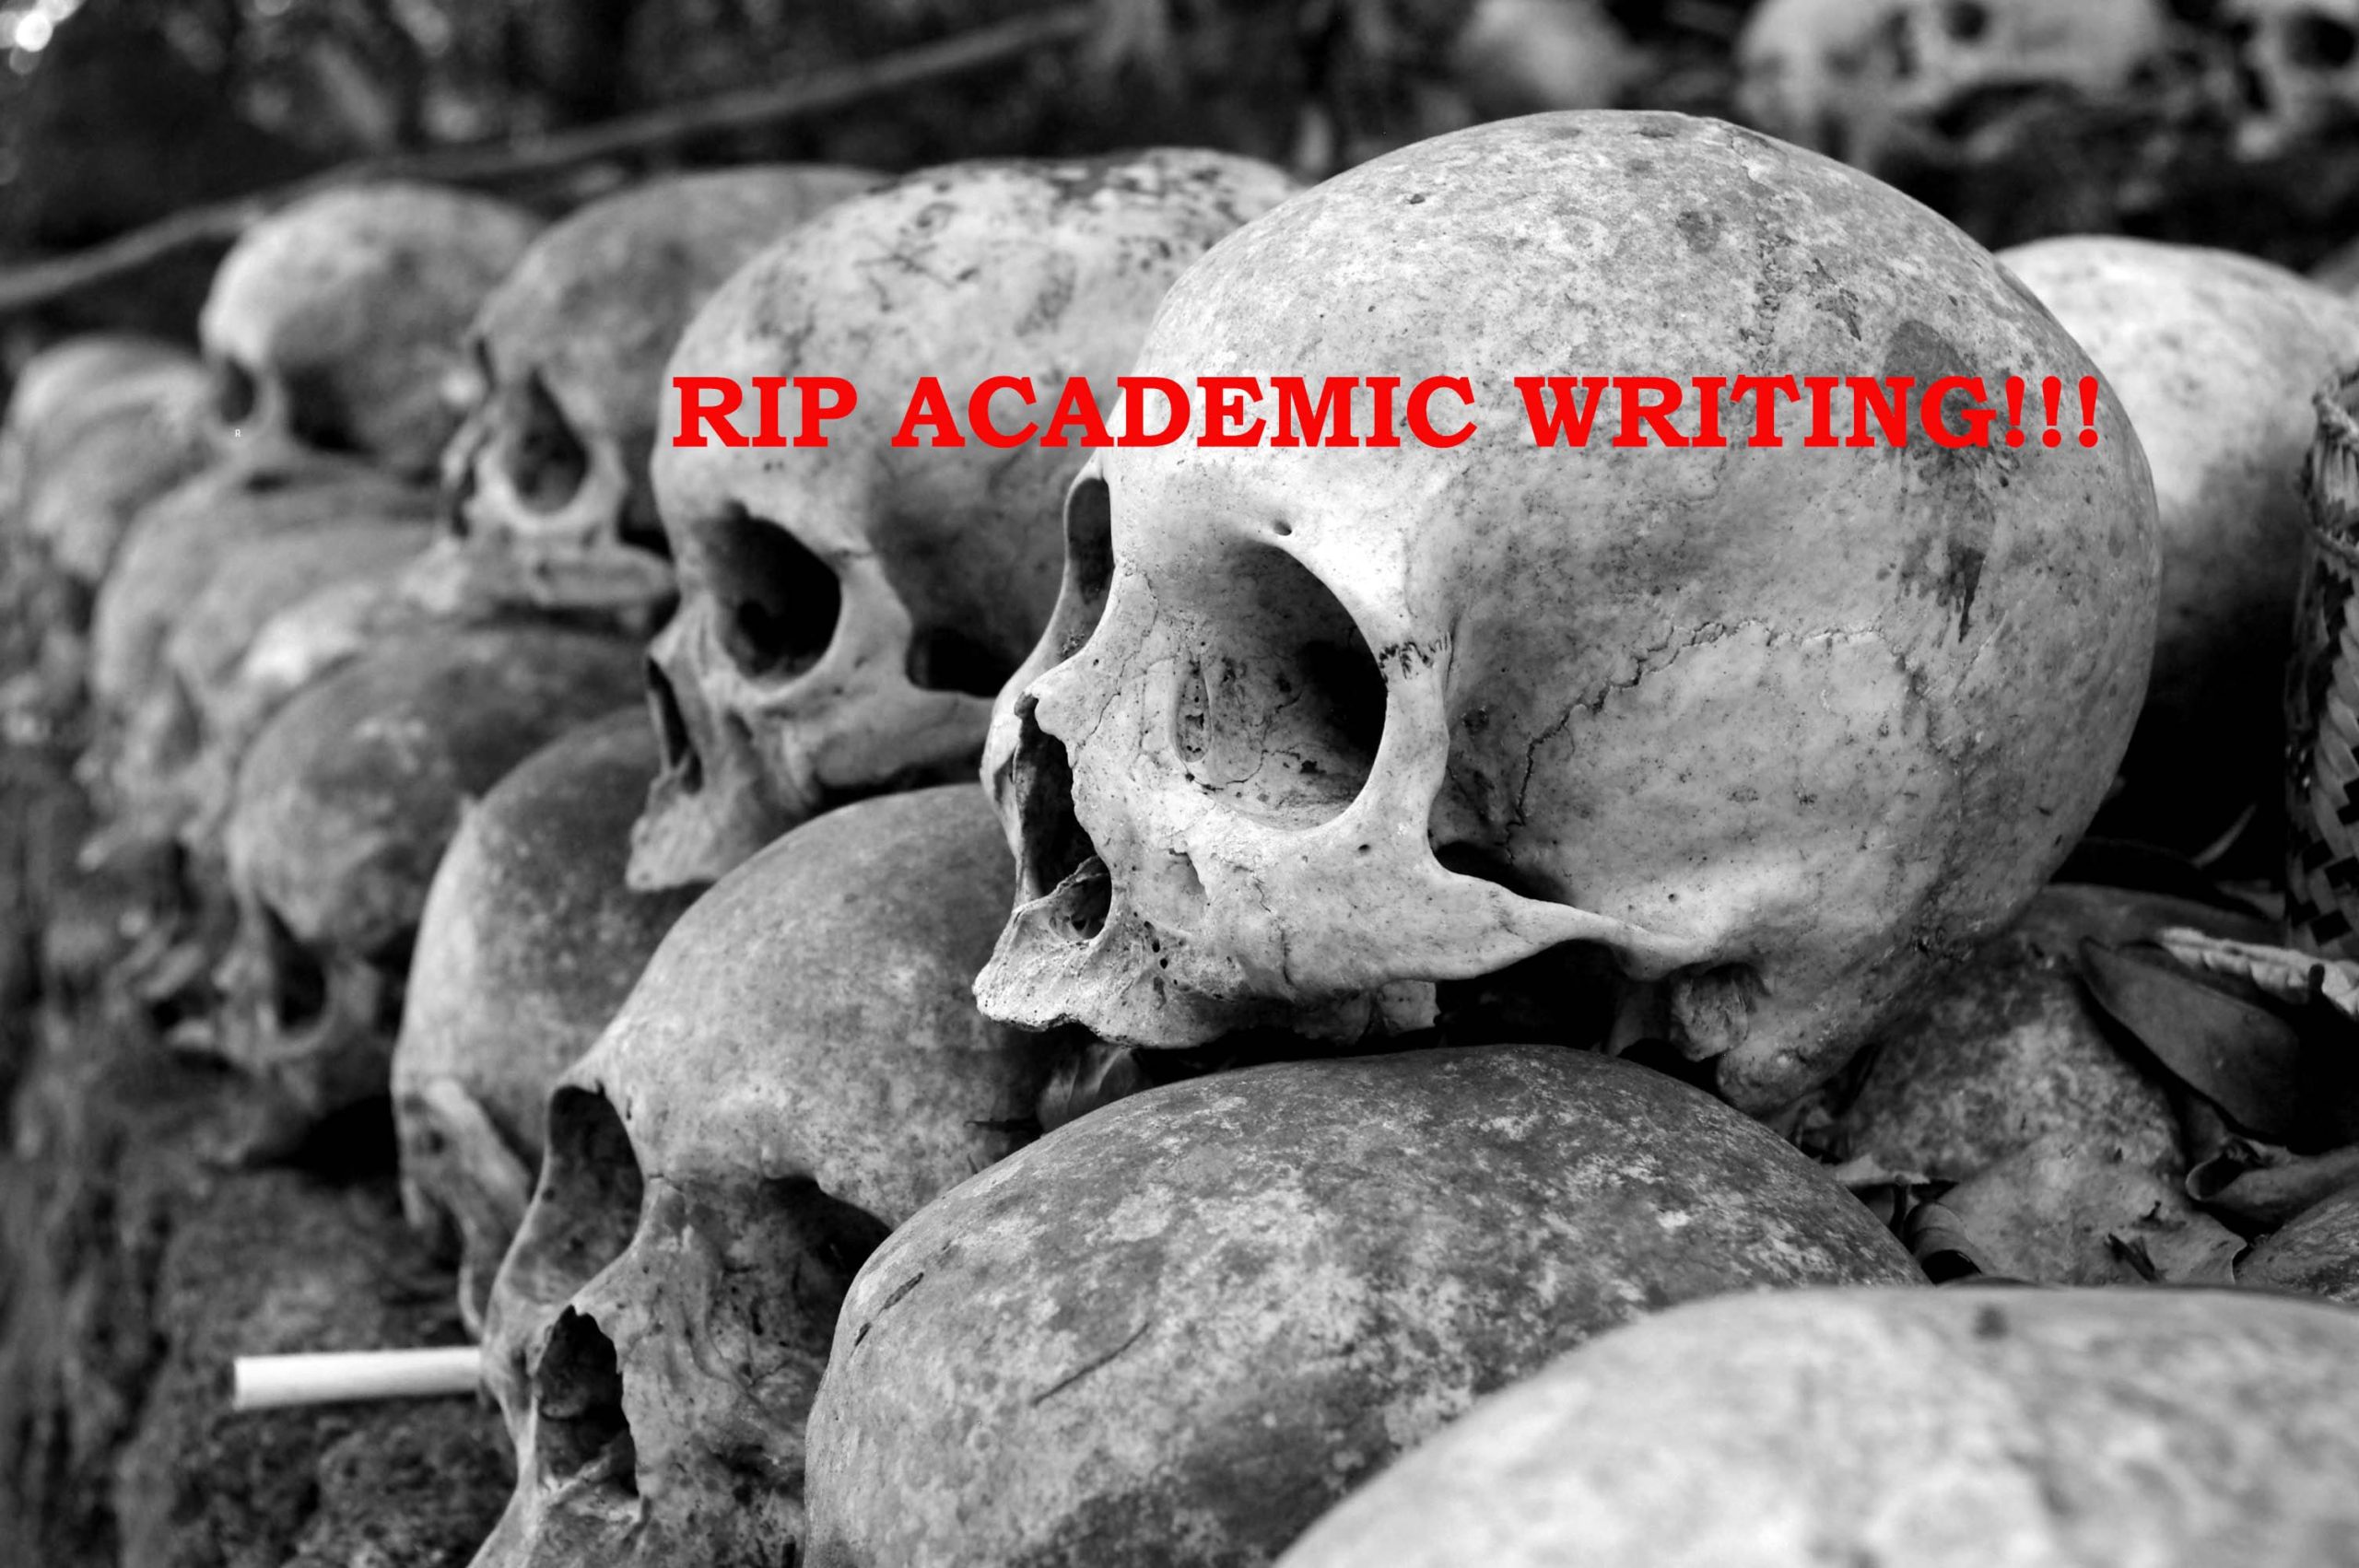 Is Academic Writing Dead?